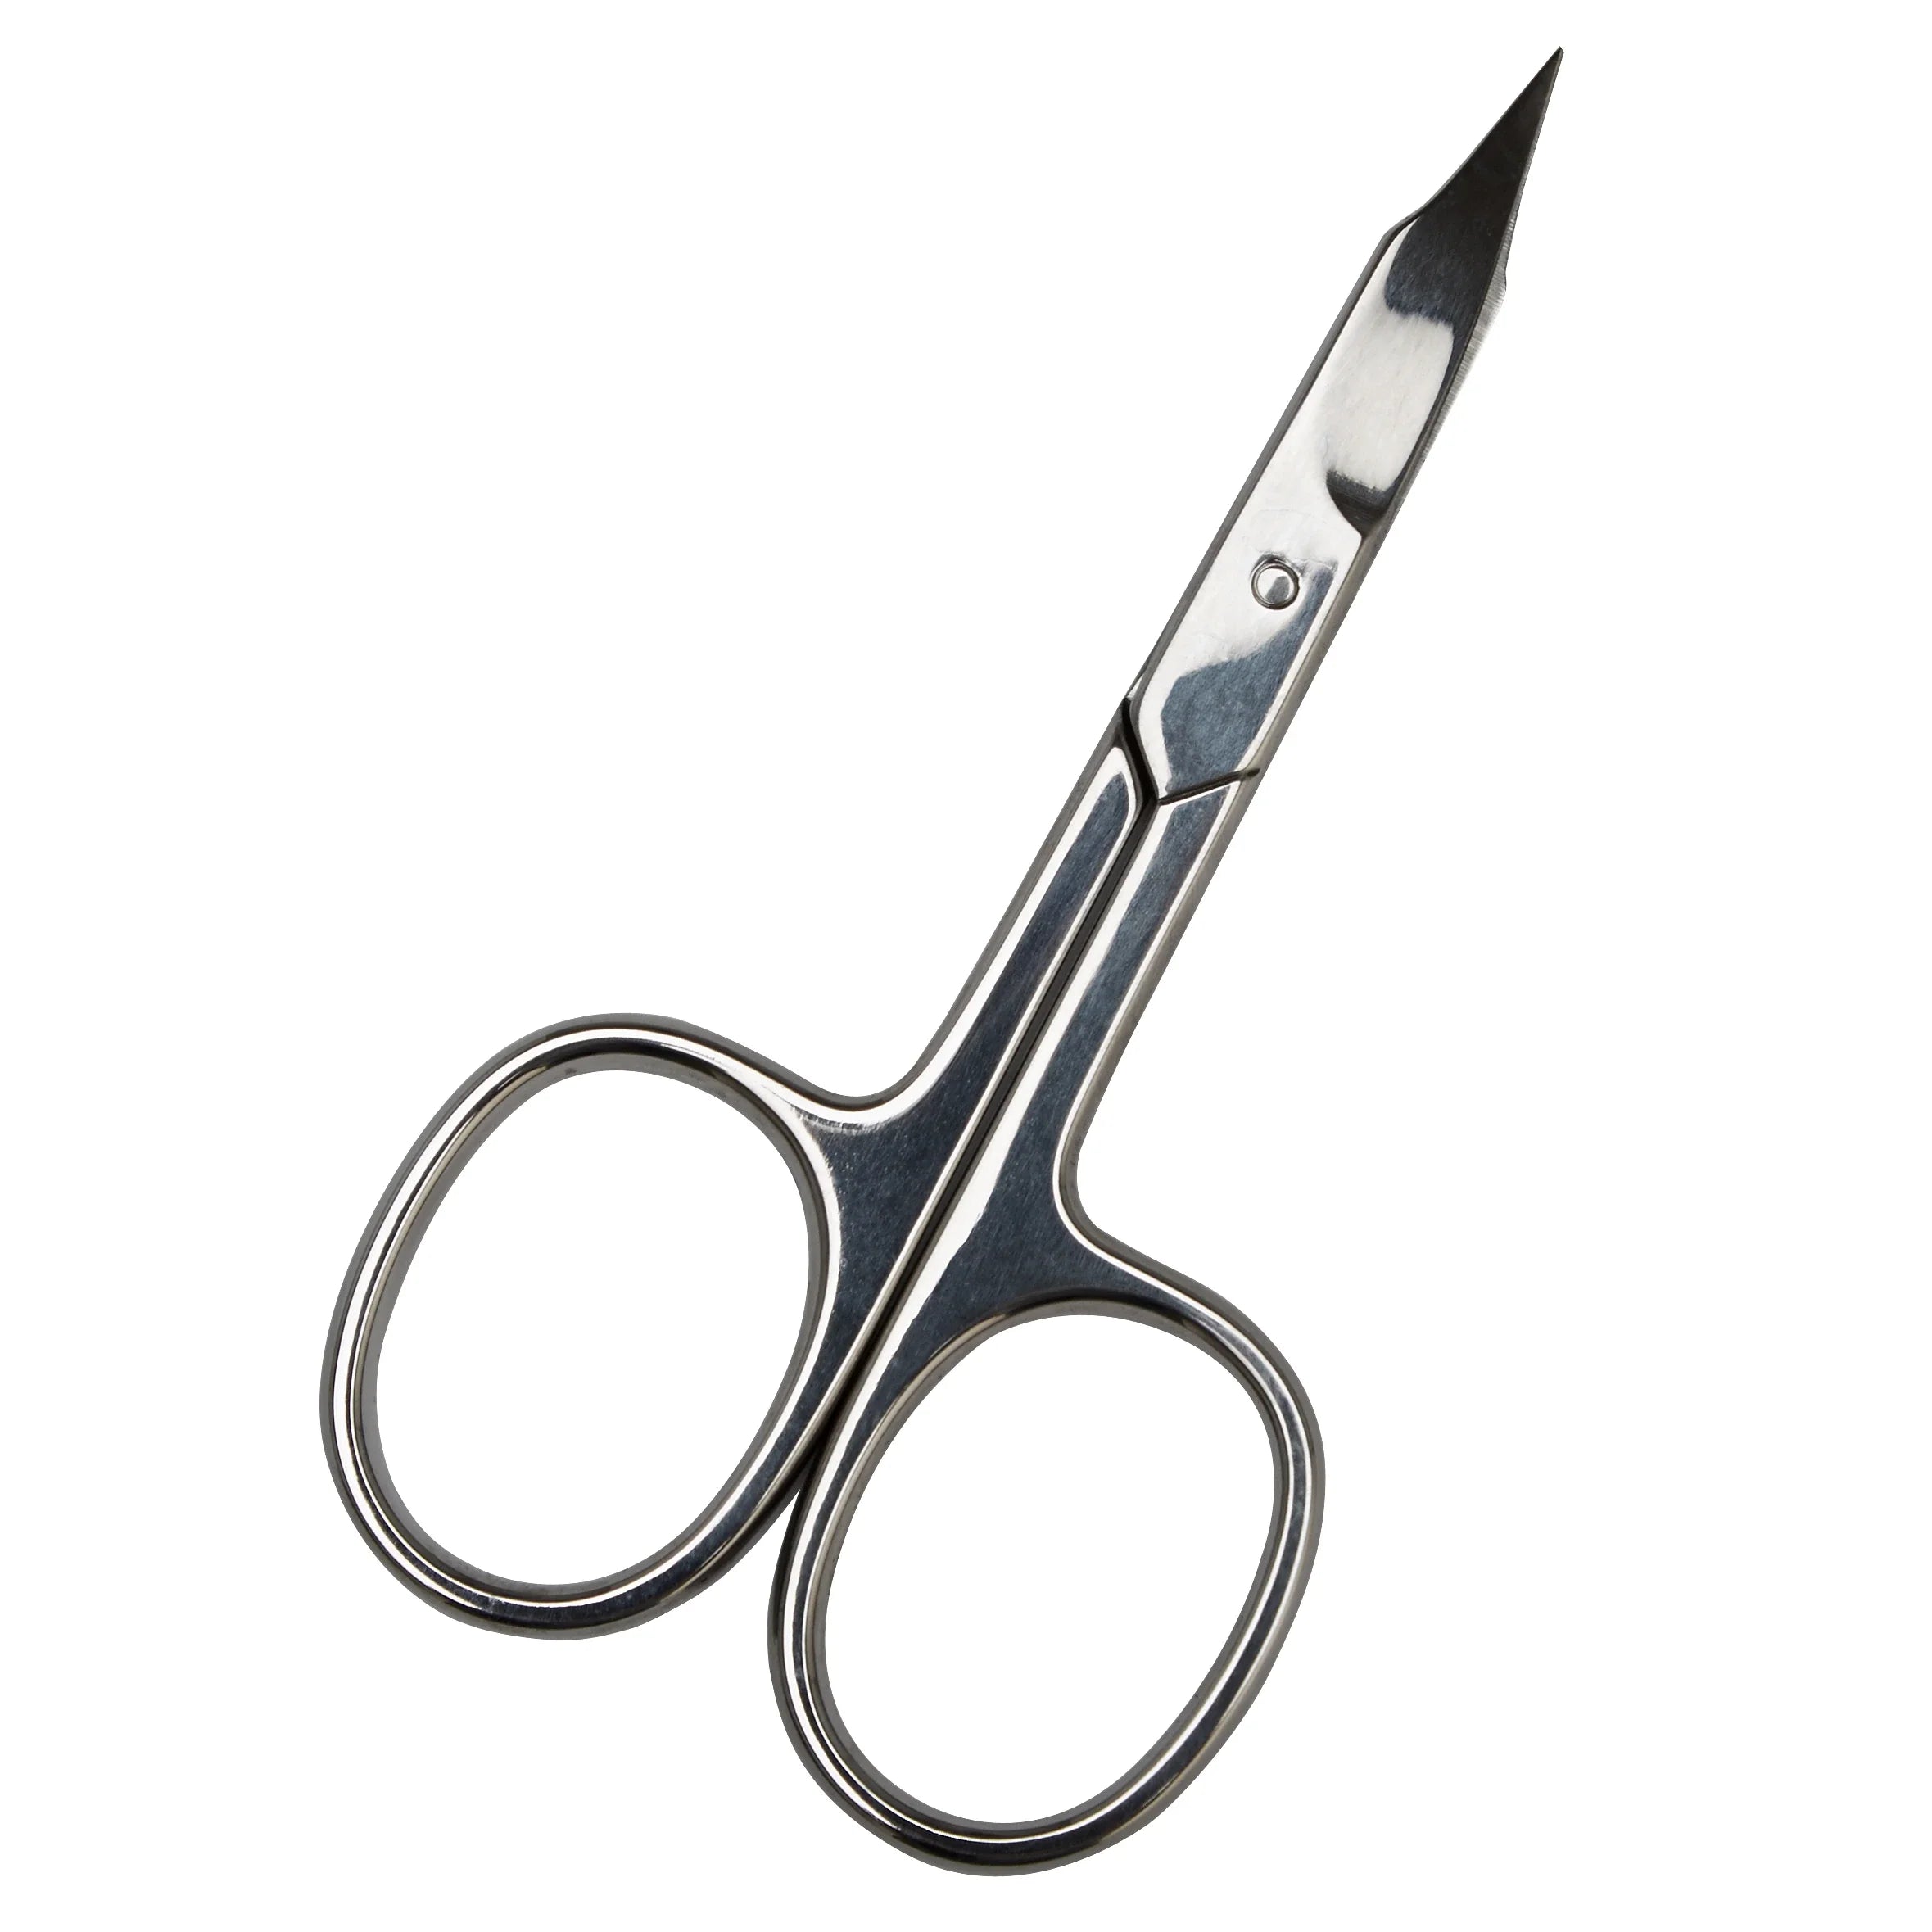 Zwilling Classic Inox combination nail scissors 9 cm - polished silver